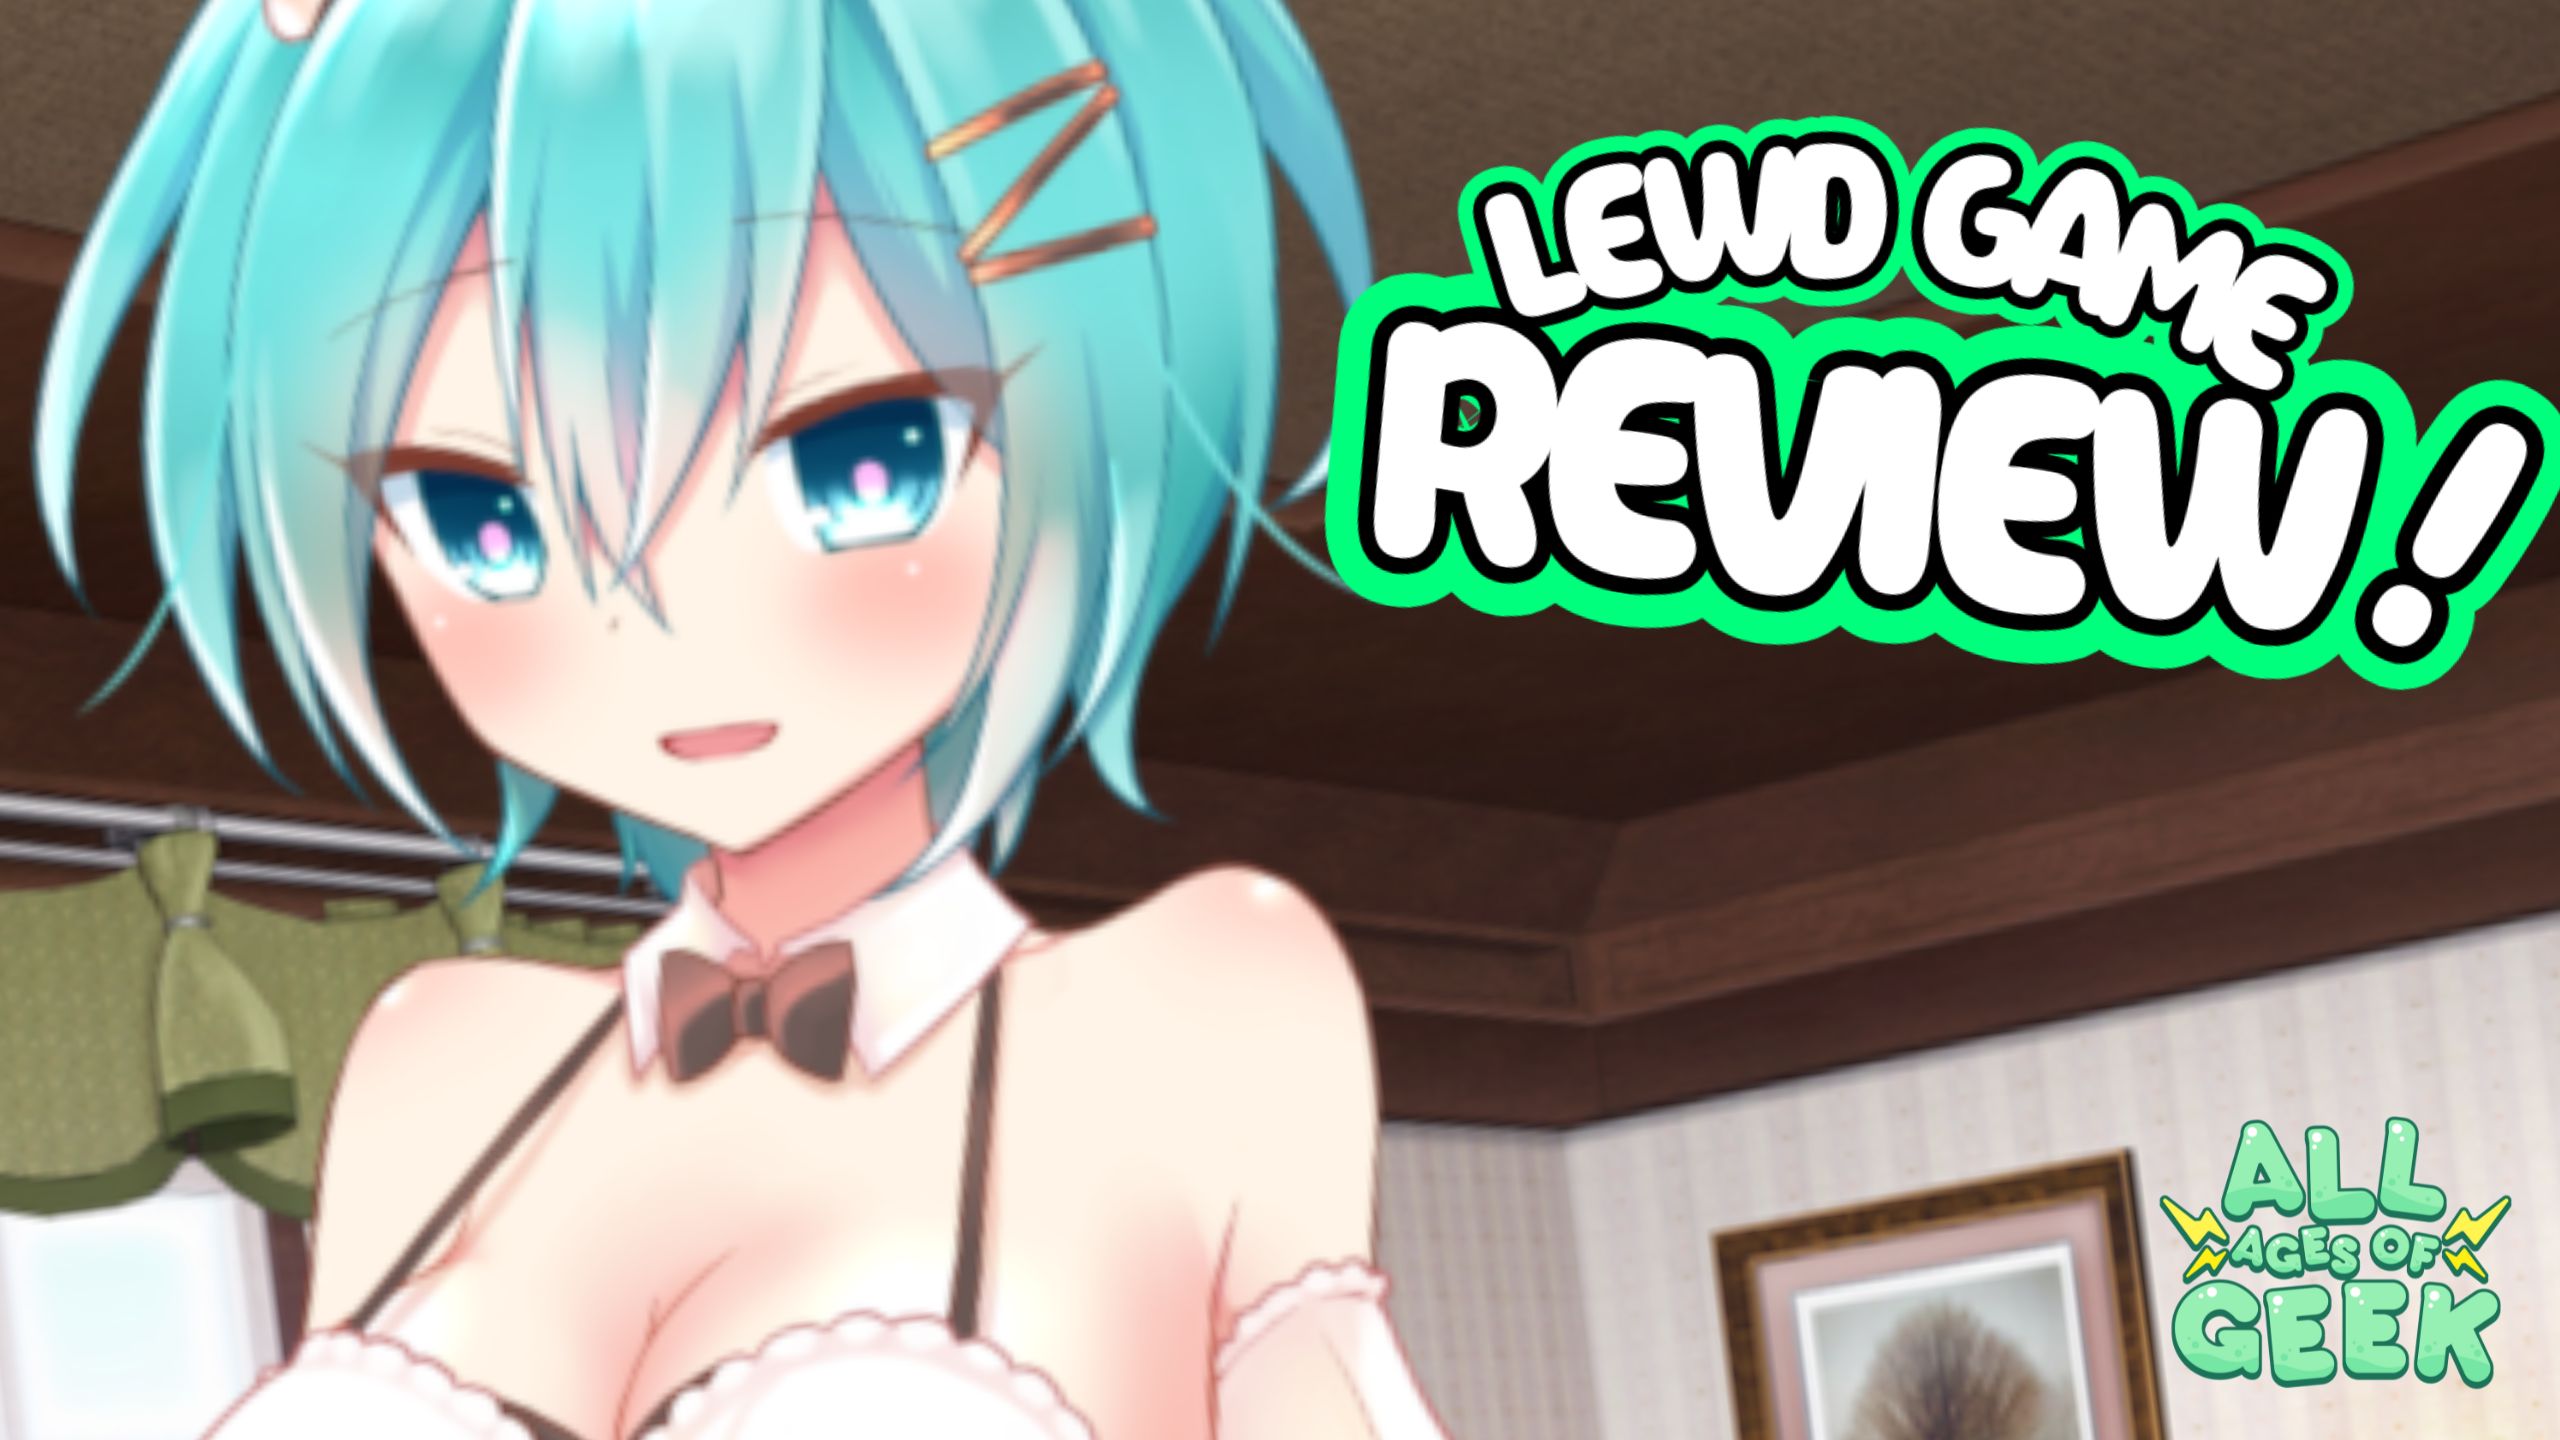 Who is the New Maid - Lewd Game Review Thumbnail